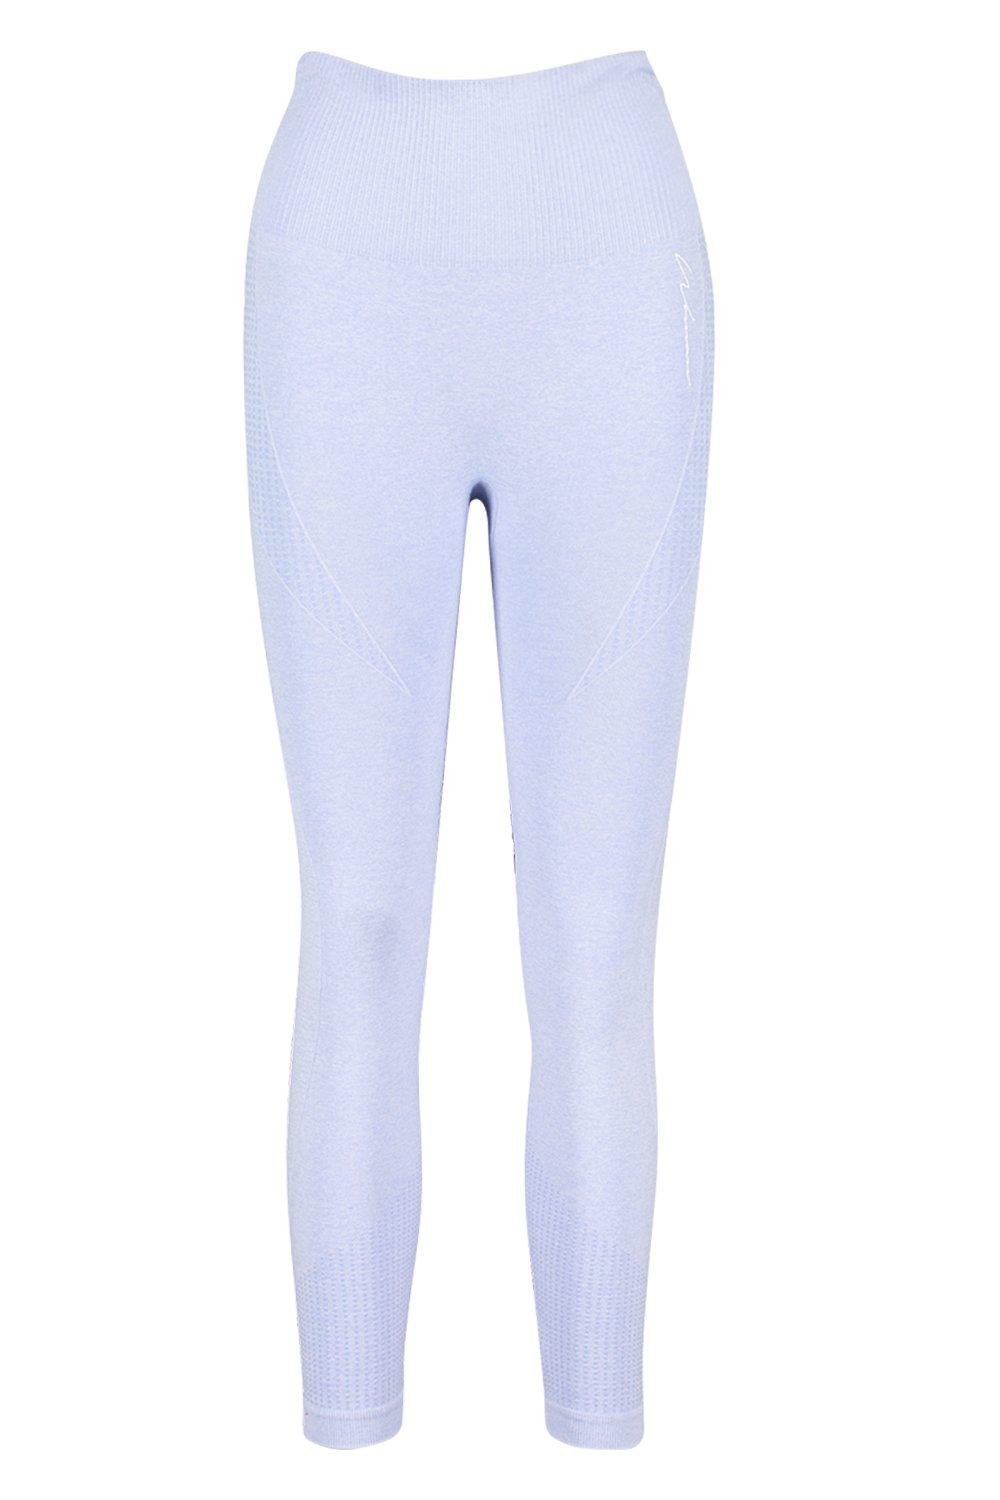 Women's Fit Contoured Supportive Waistband Seamless Leggings